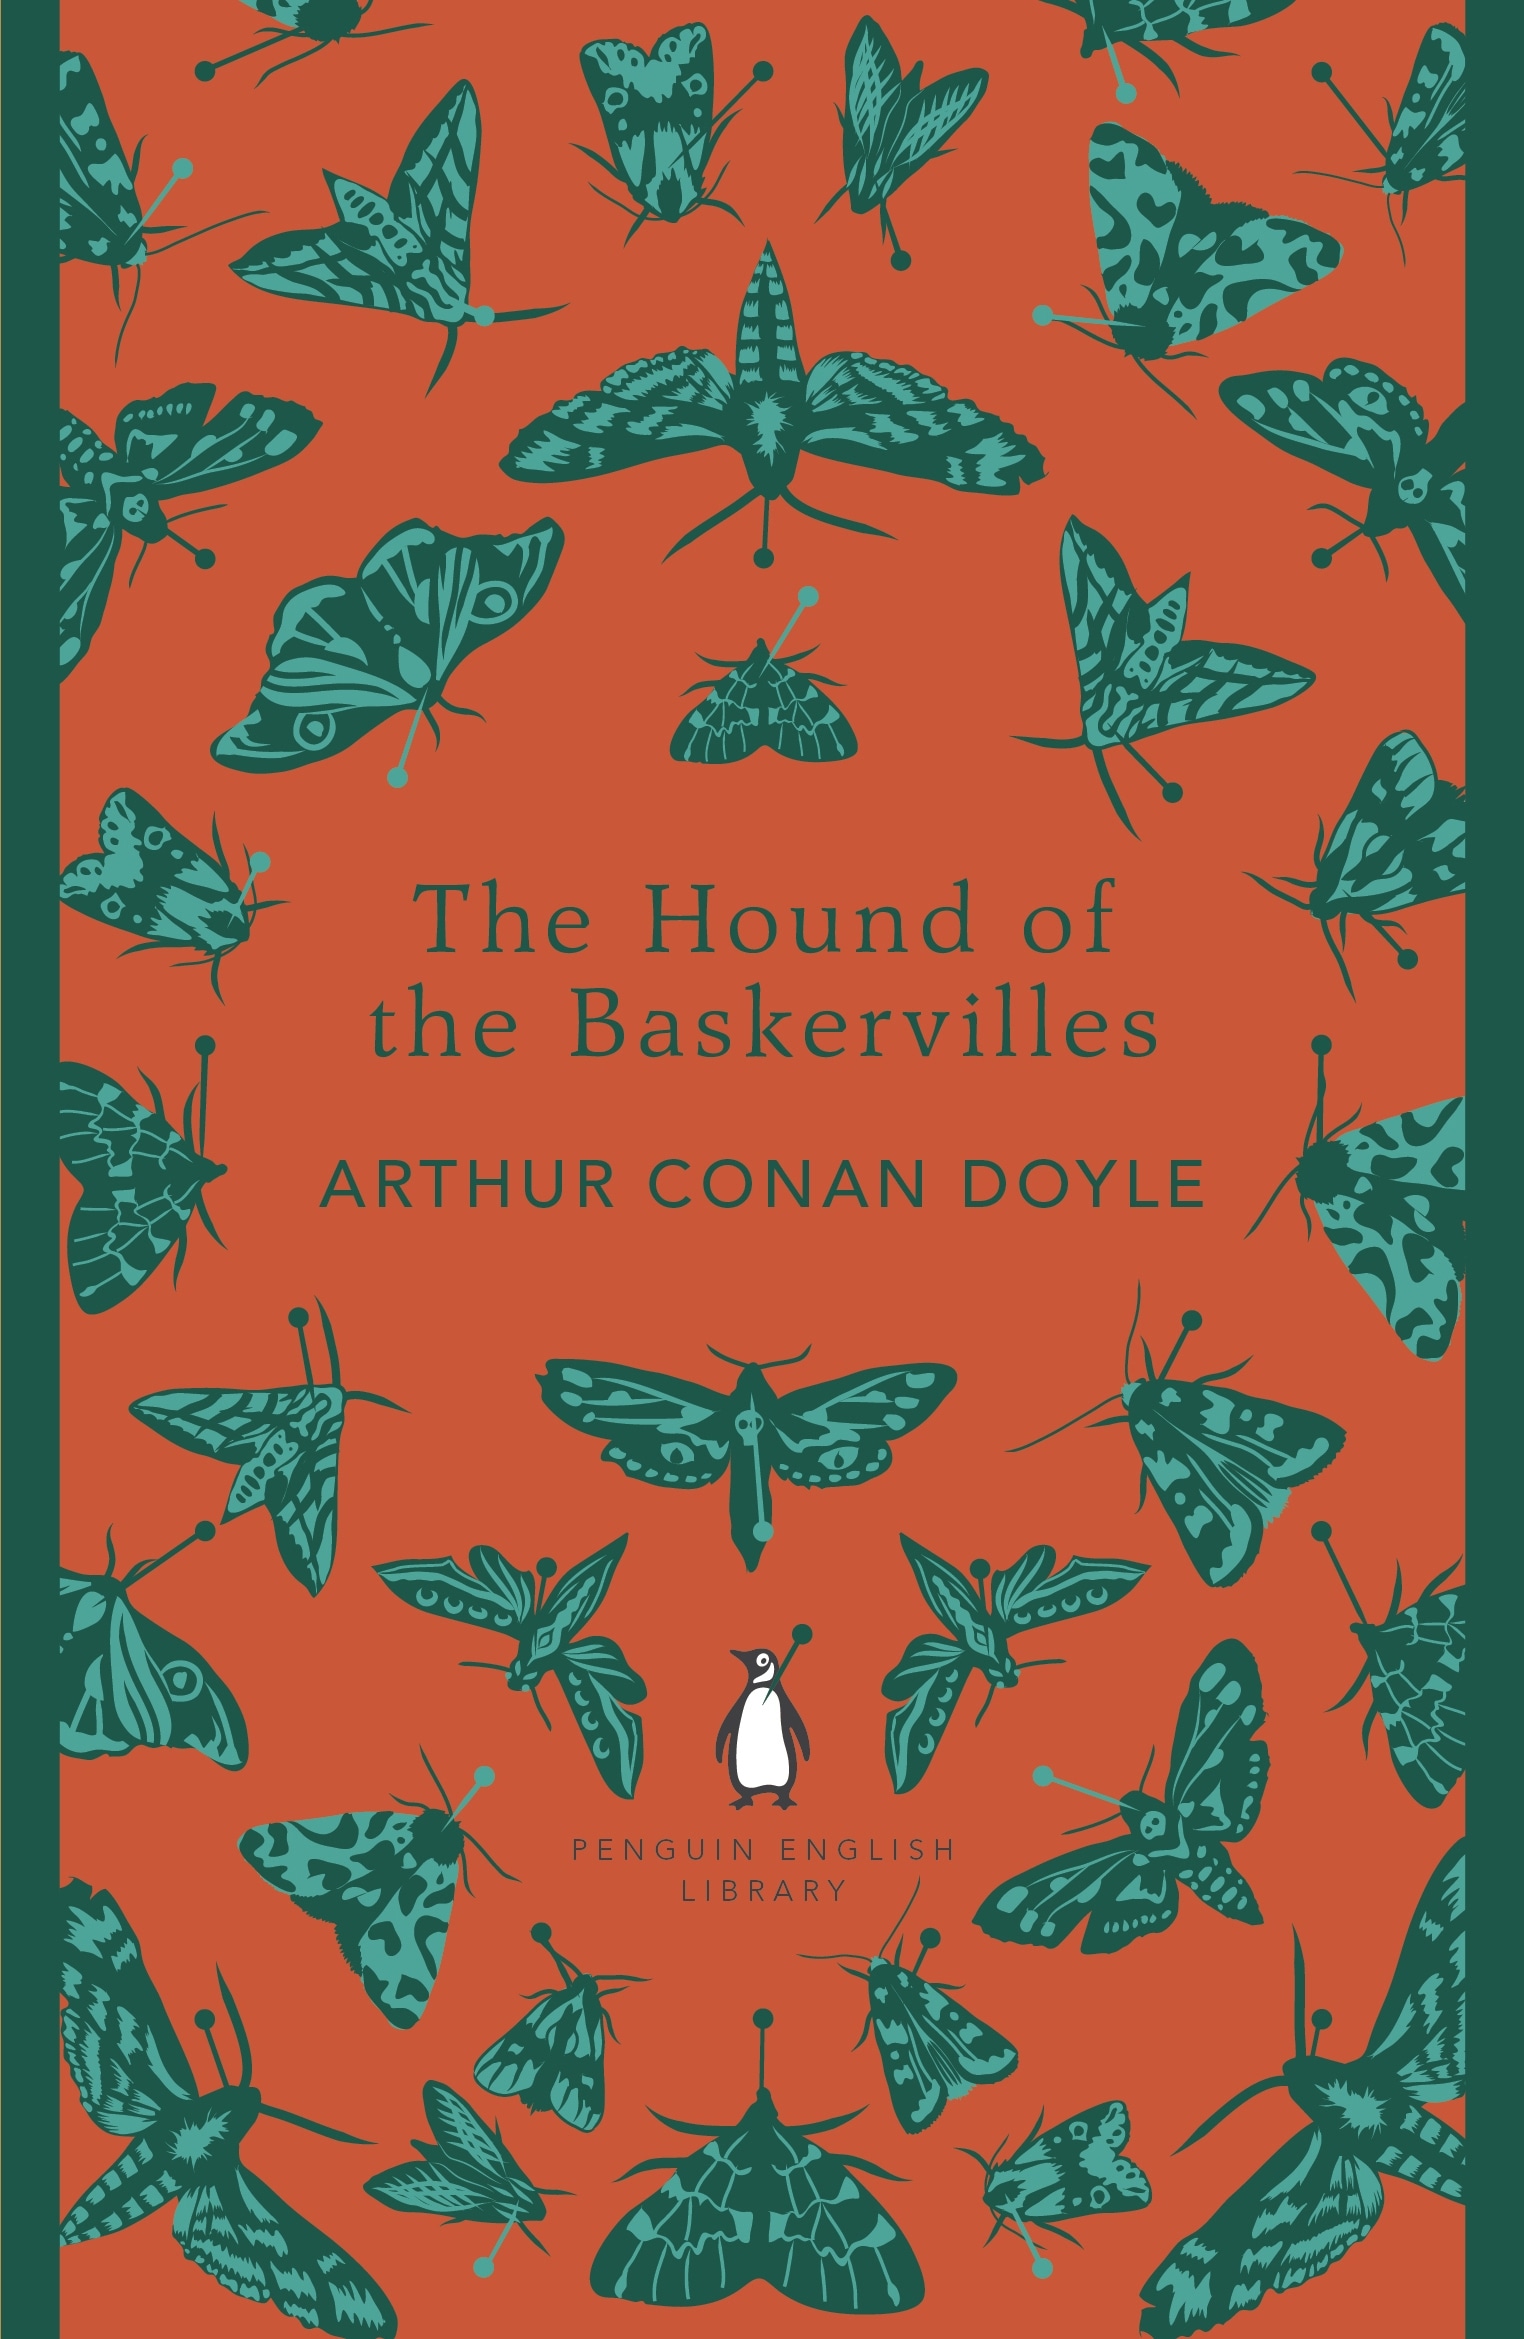 Book “The Hound of the Baskervilles” by Arthur Conan Doyle — December 6, 2012